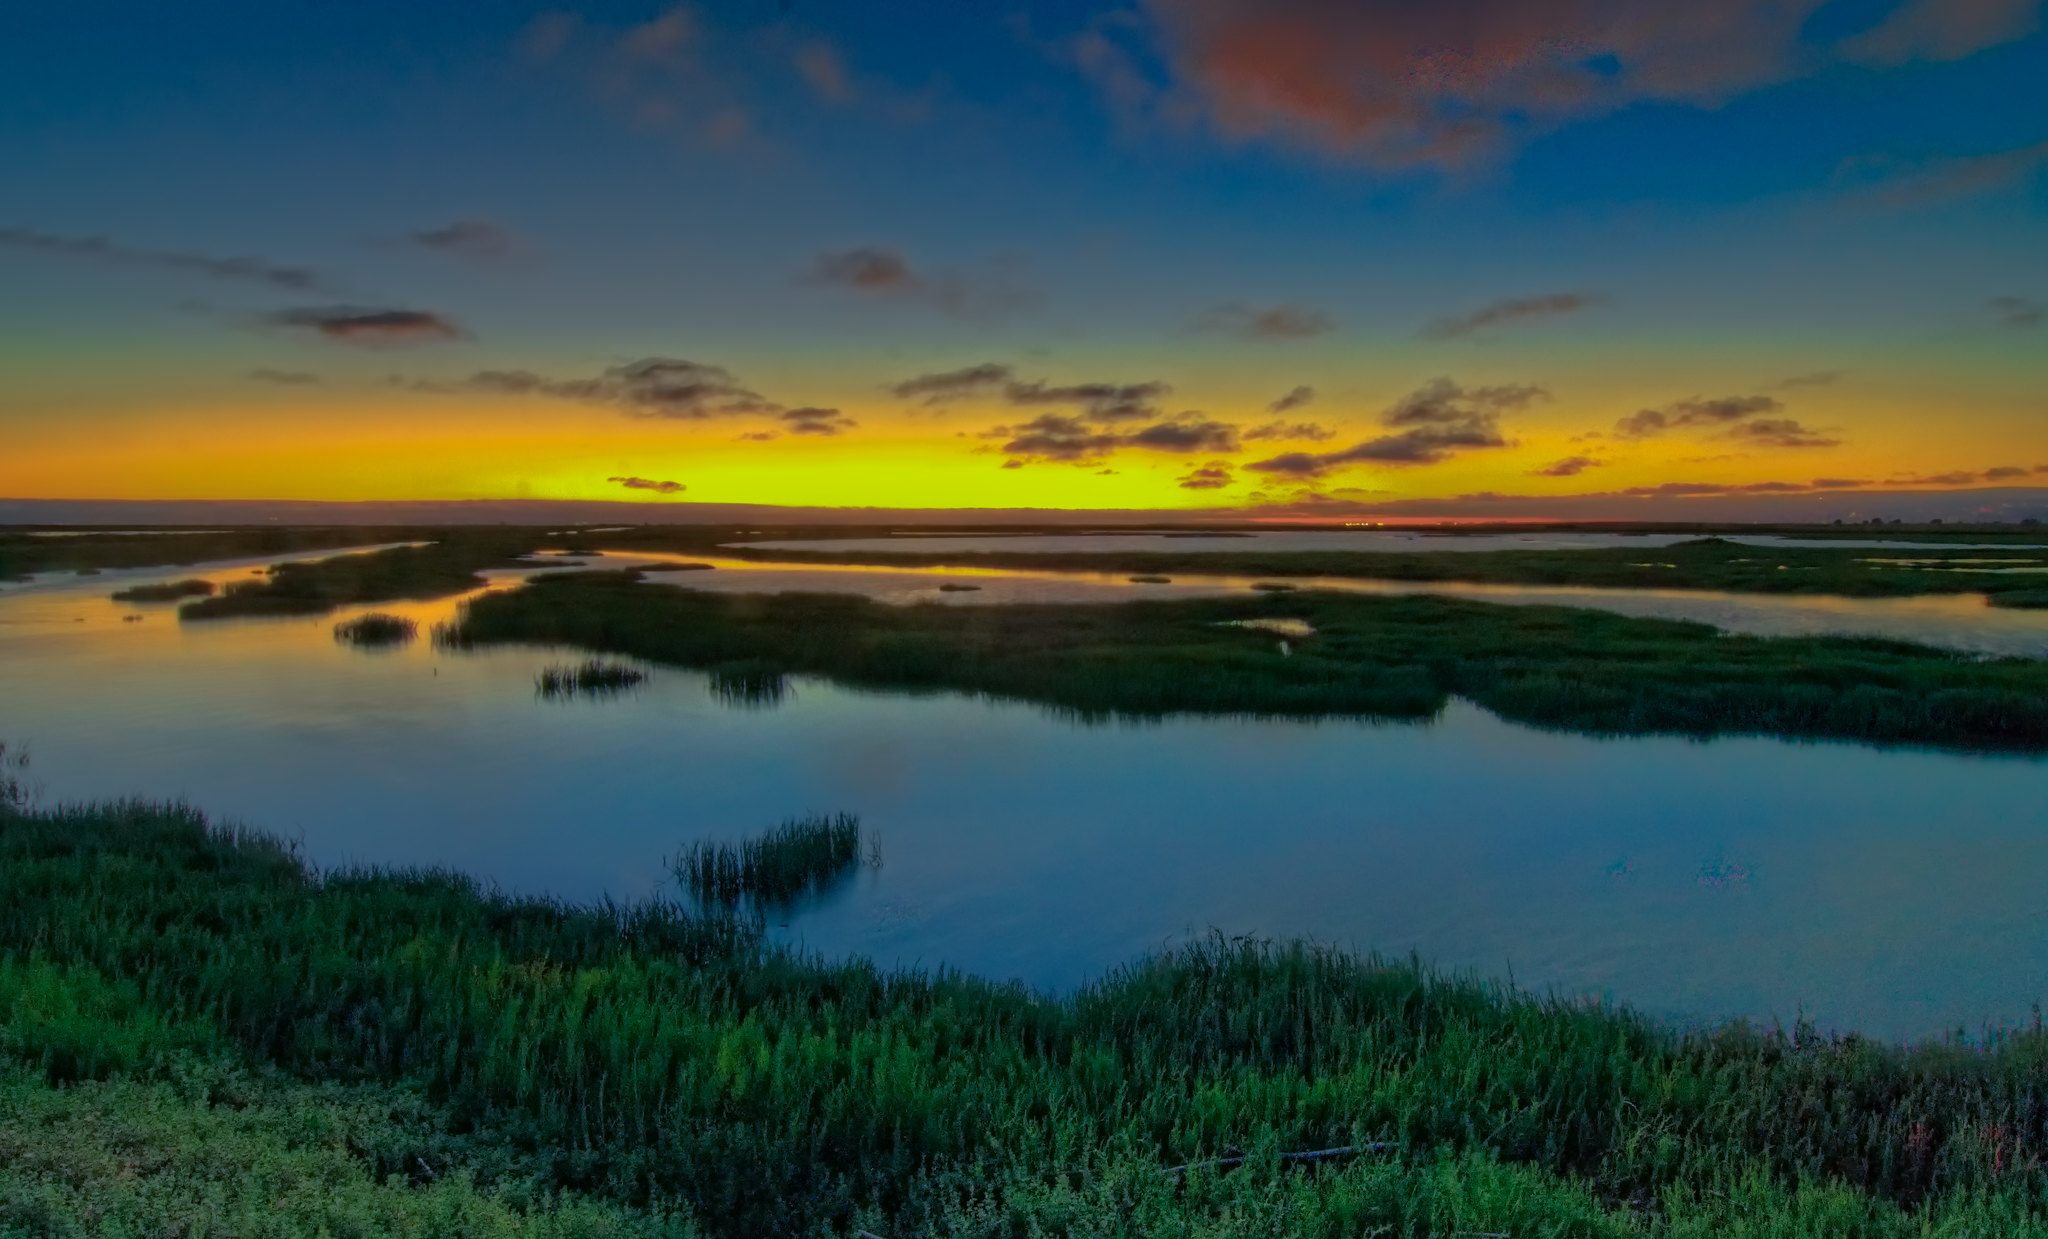 A sunset over the Bay marshes on the Hayward Shoreline.